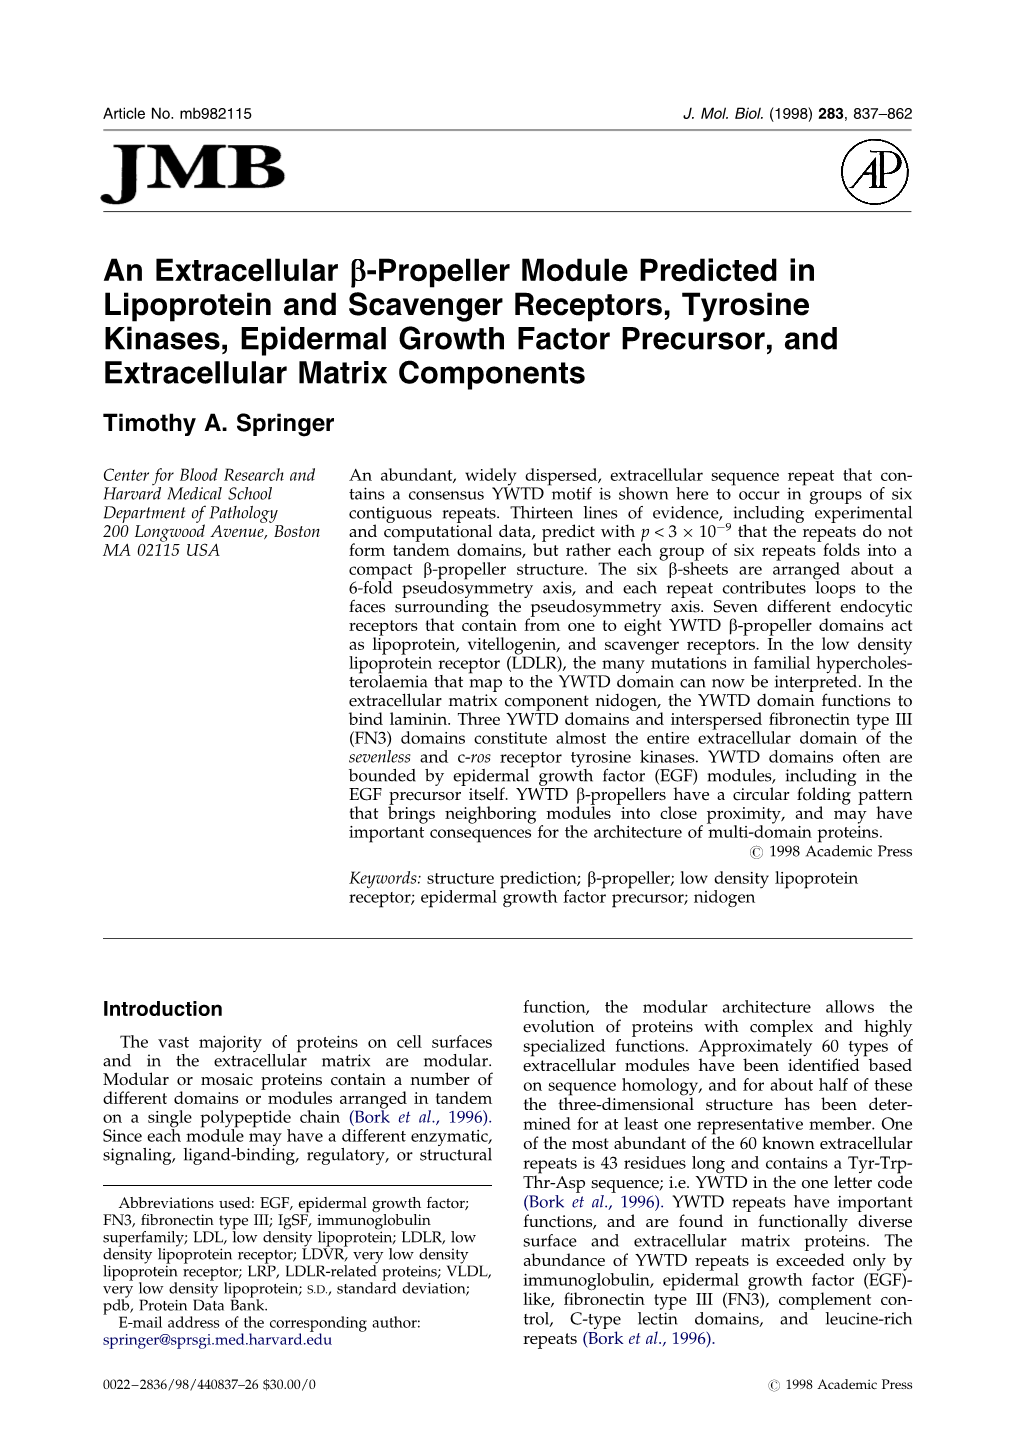 An Extracellular Β-Propeller Module Predicted in Lipoprotein And